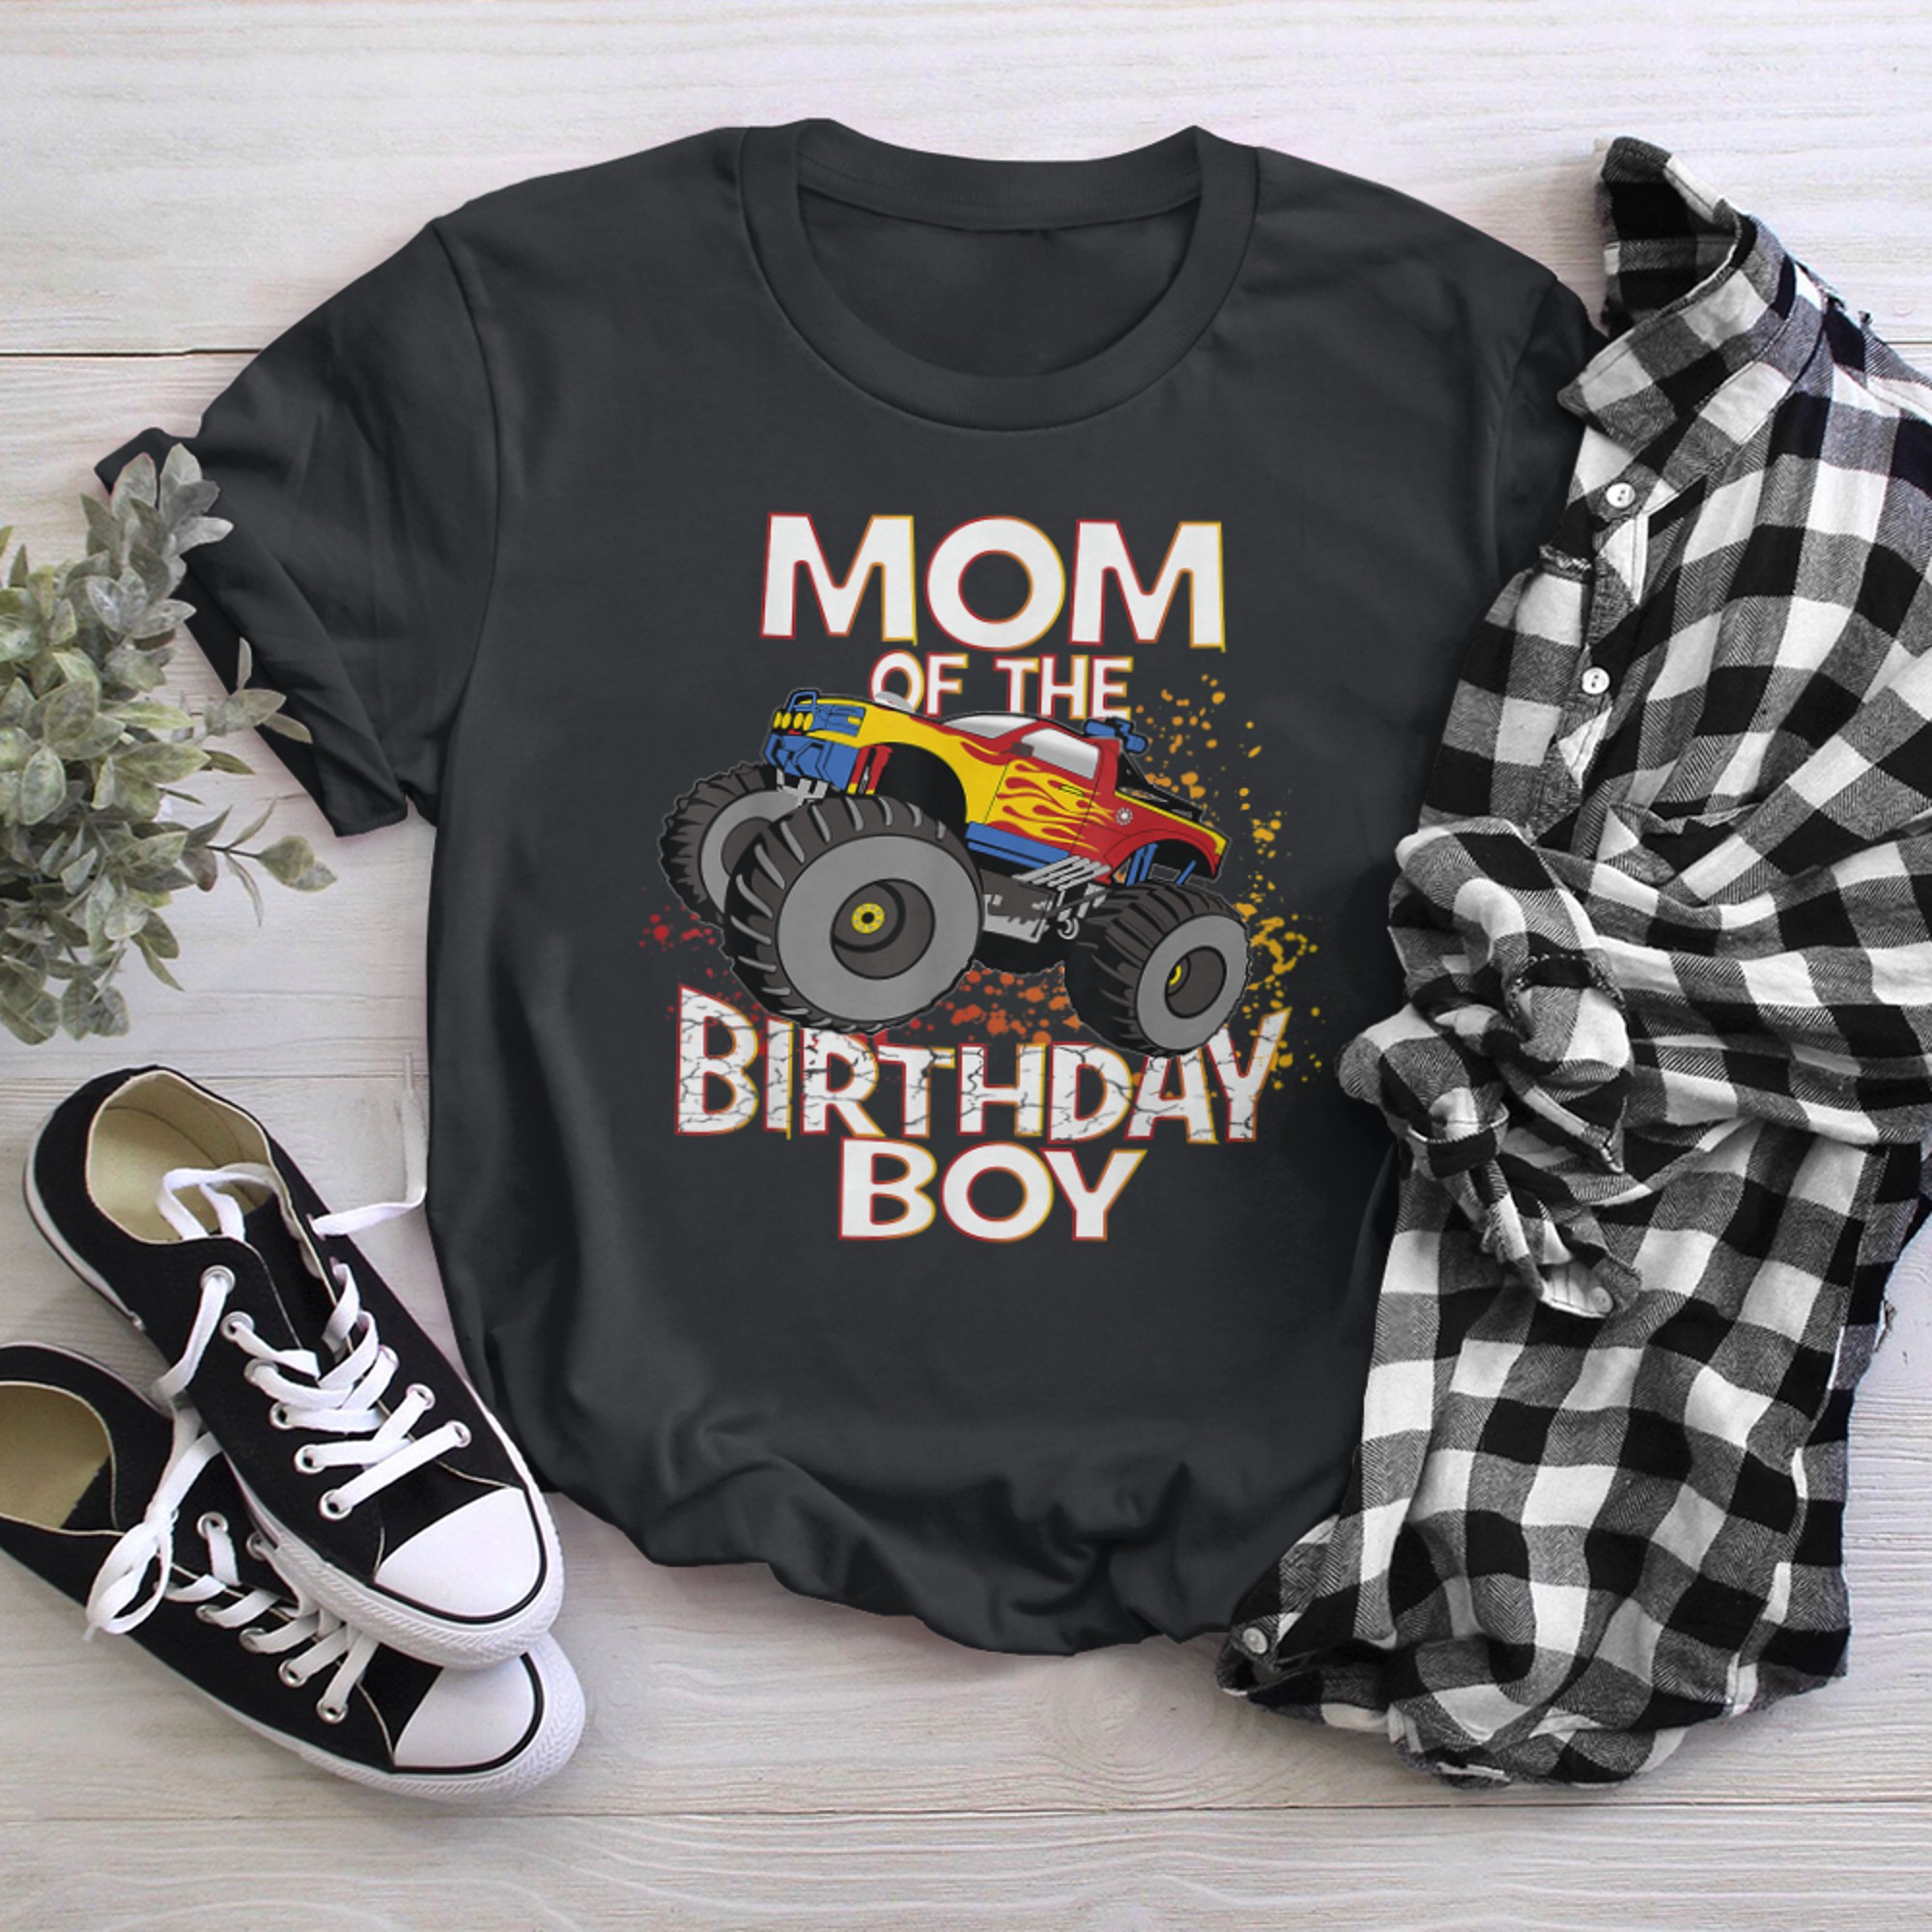 Mom Of The Birthday Monster Truck Party t-shirt black